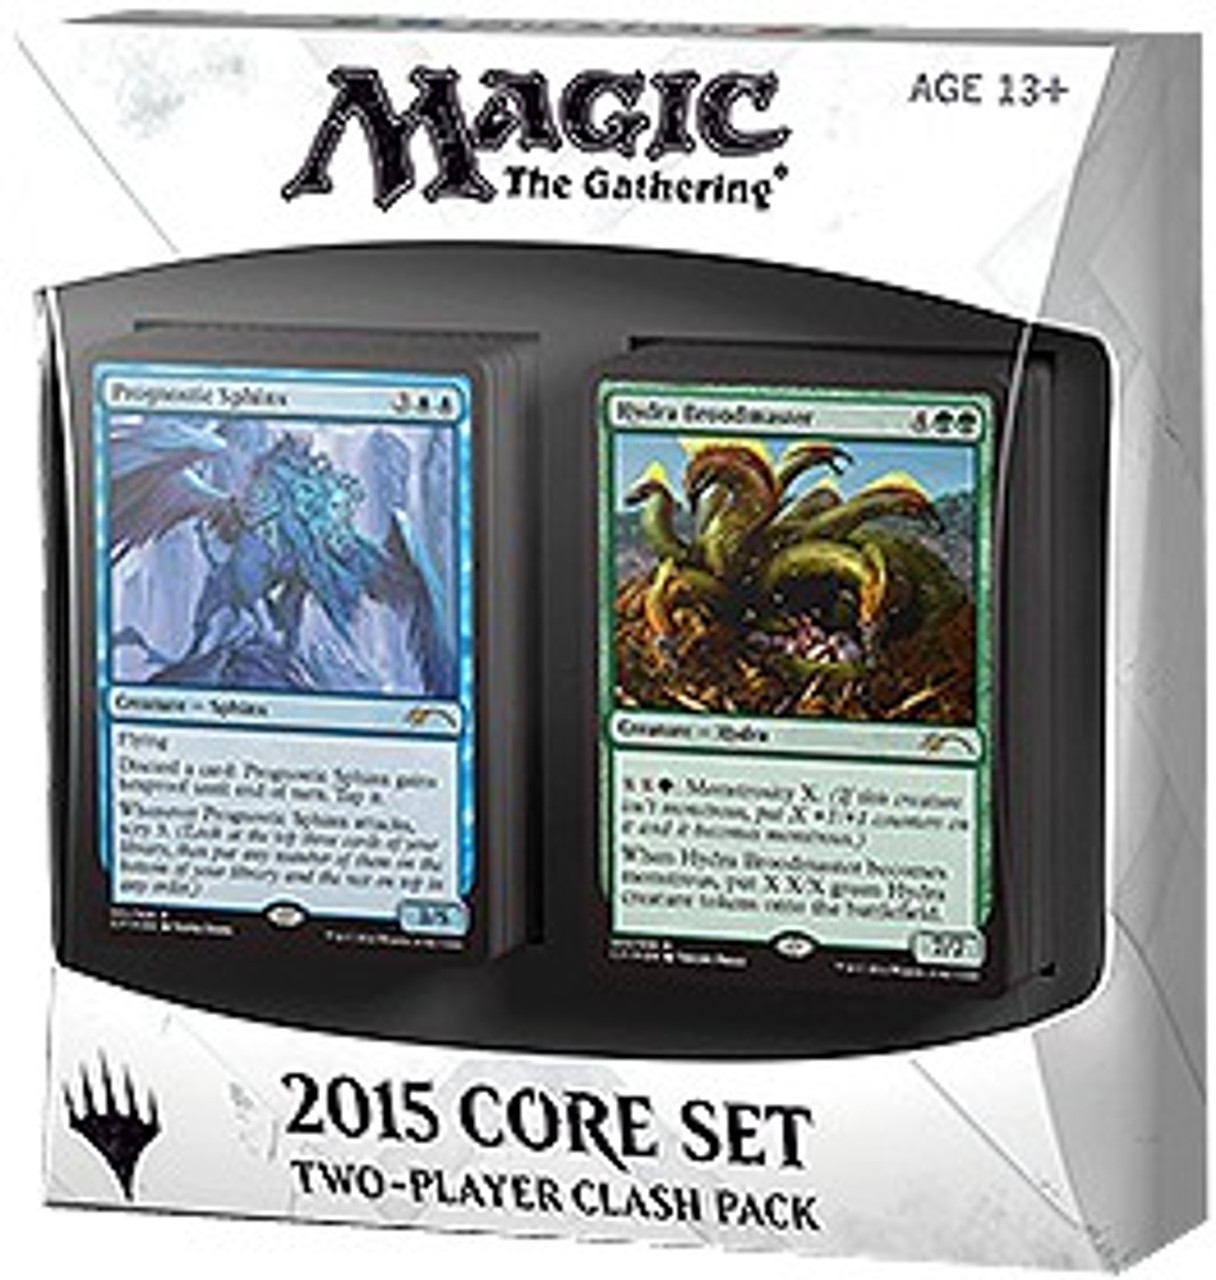 Magic The Gathering Trading Card Game 2015 Core Set Fate Fury 2 Player Clash Pack Wizards Of The Coast Toywiz - roblox how to add music to your game 2015